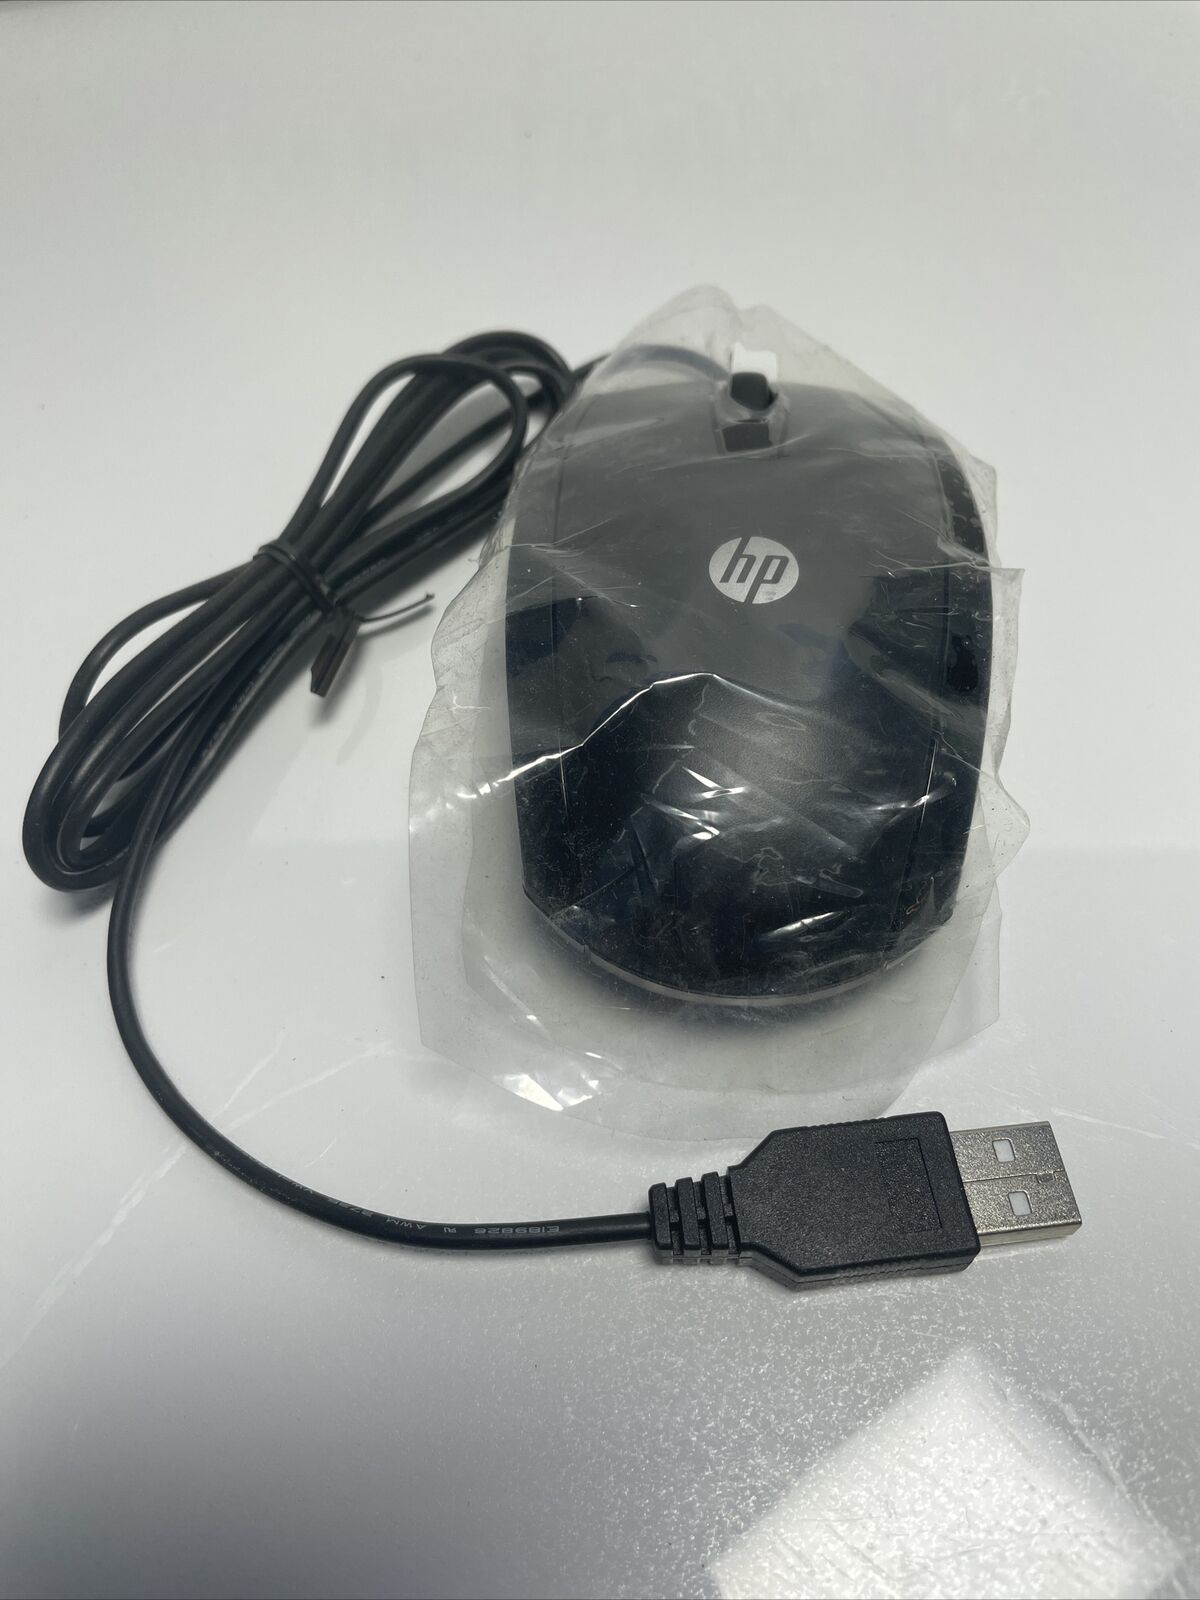 Genuine HP USB Optical Corded Mouse w/ 3 Buttons (MSU0923) - BRAND NEW